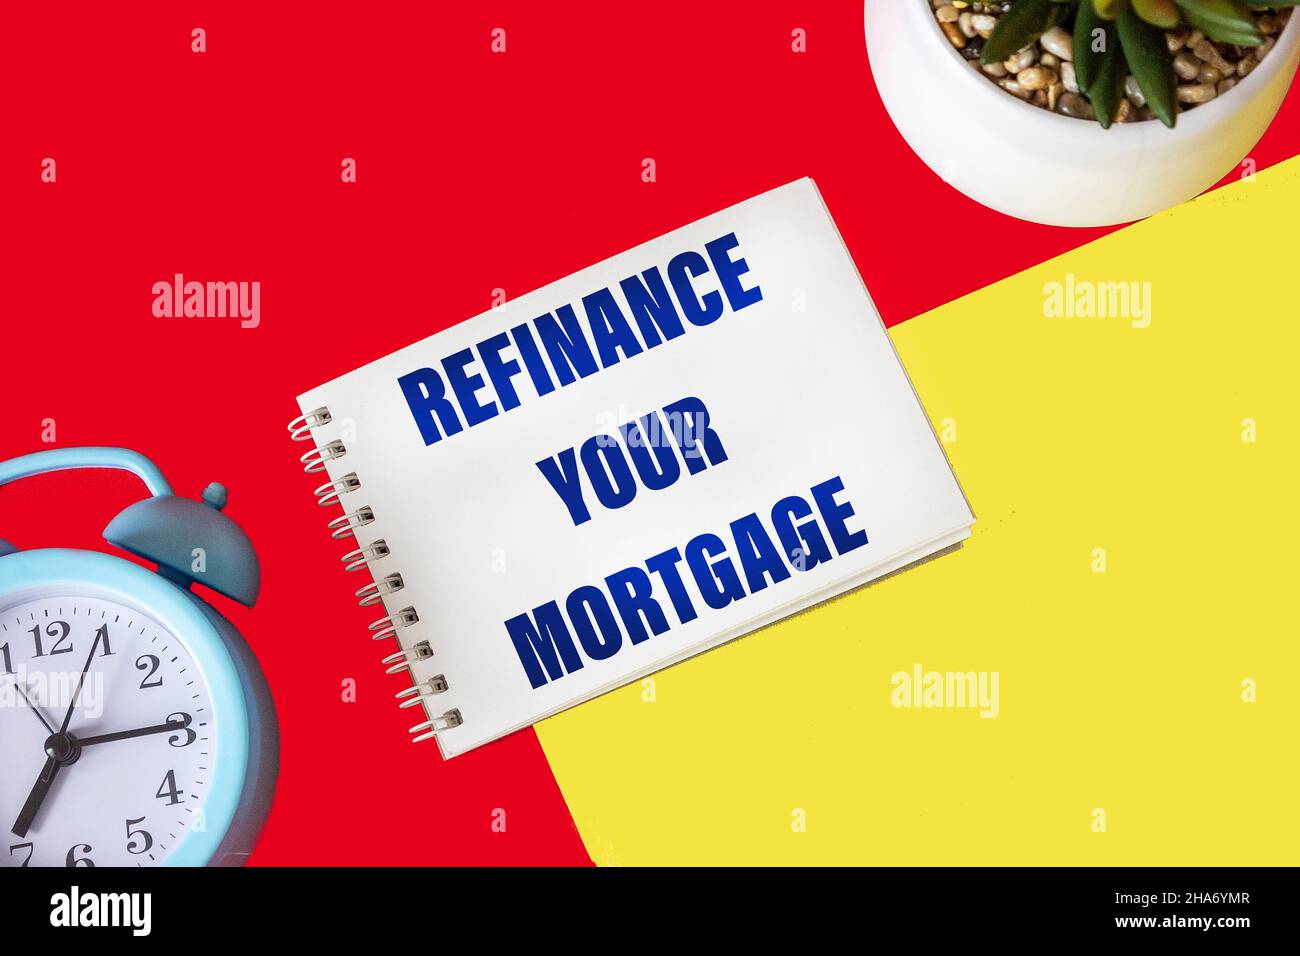 Text Refinance your mortgage, written on a notepad and a red and yellow background with a clock and a cactus Stock Photo